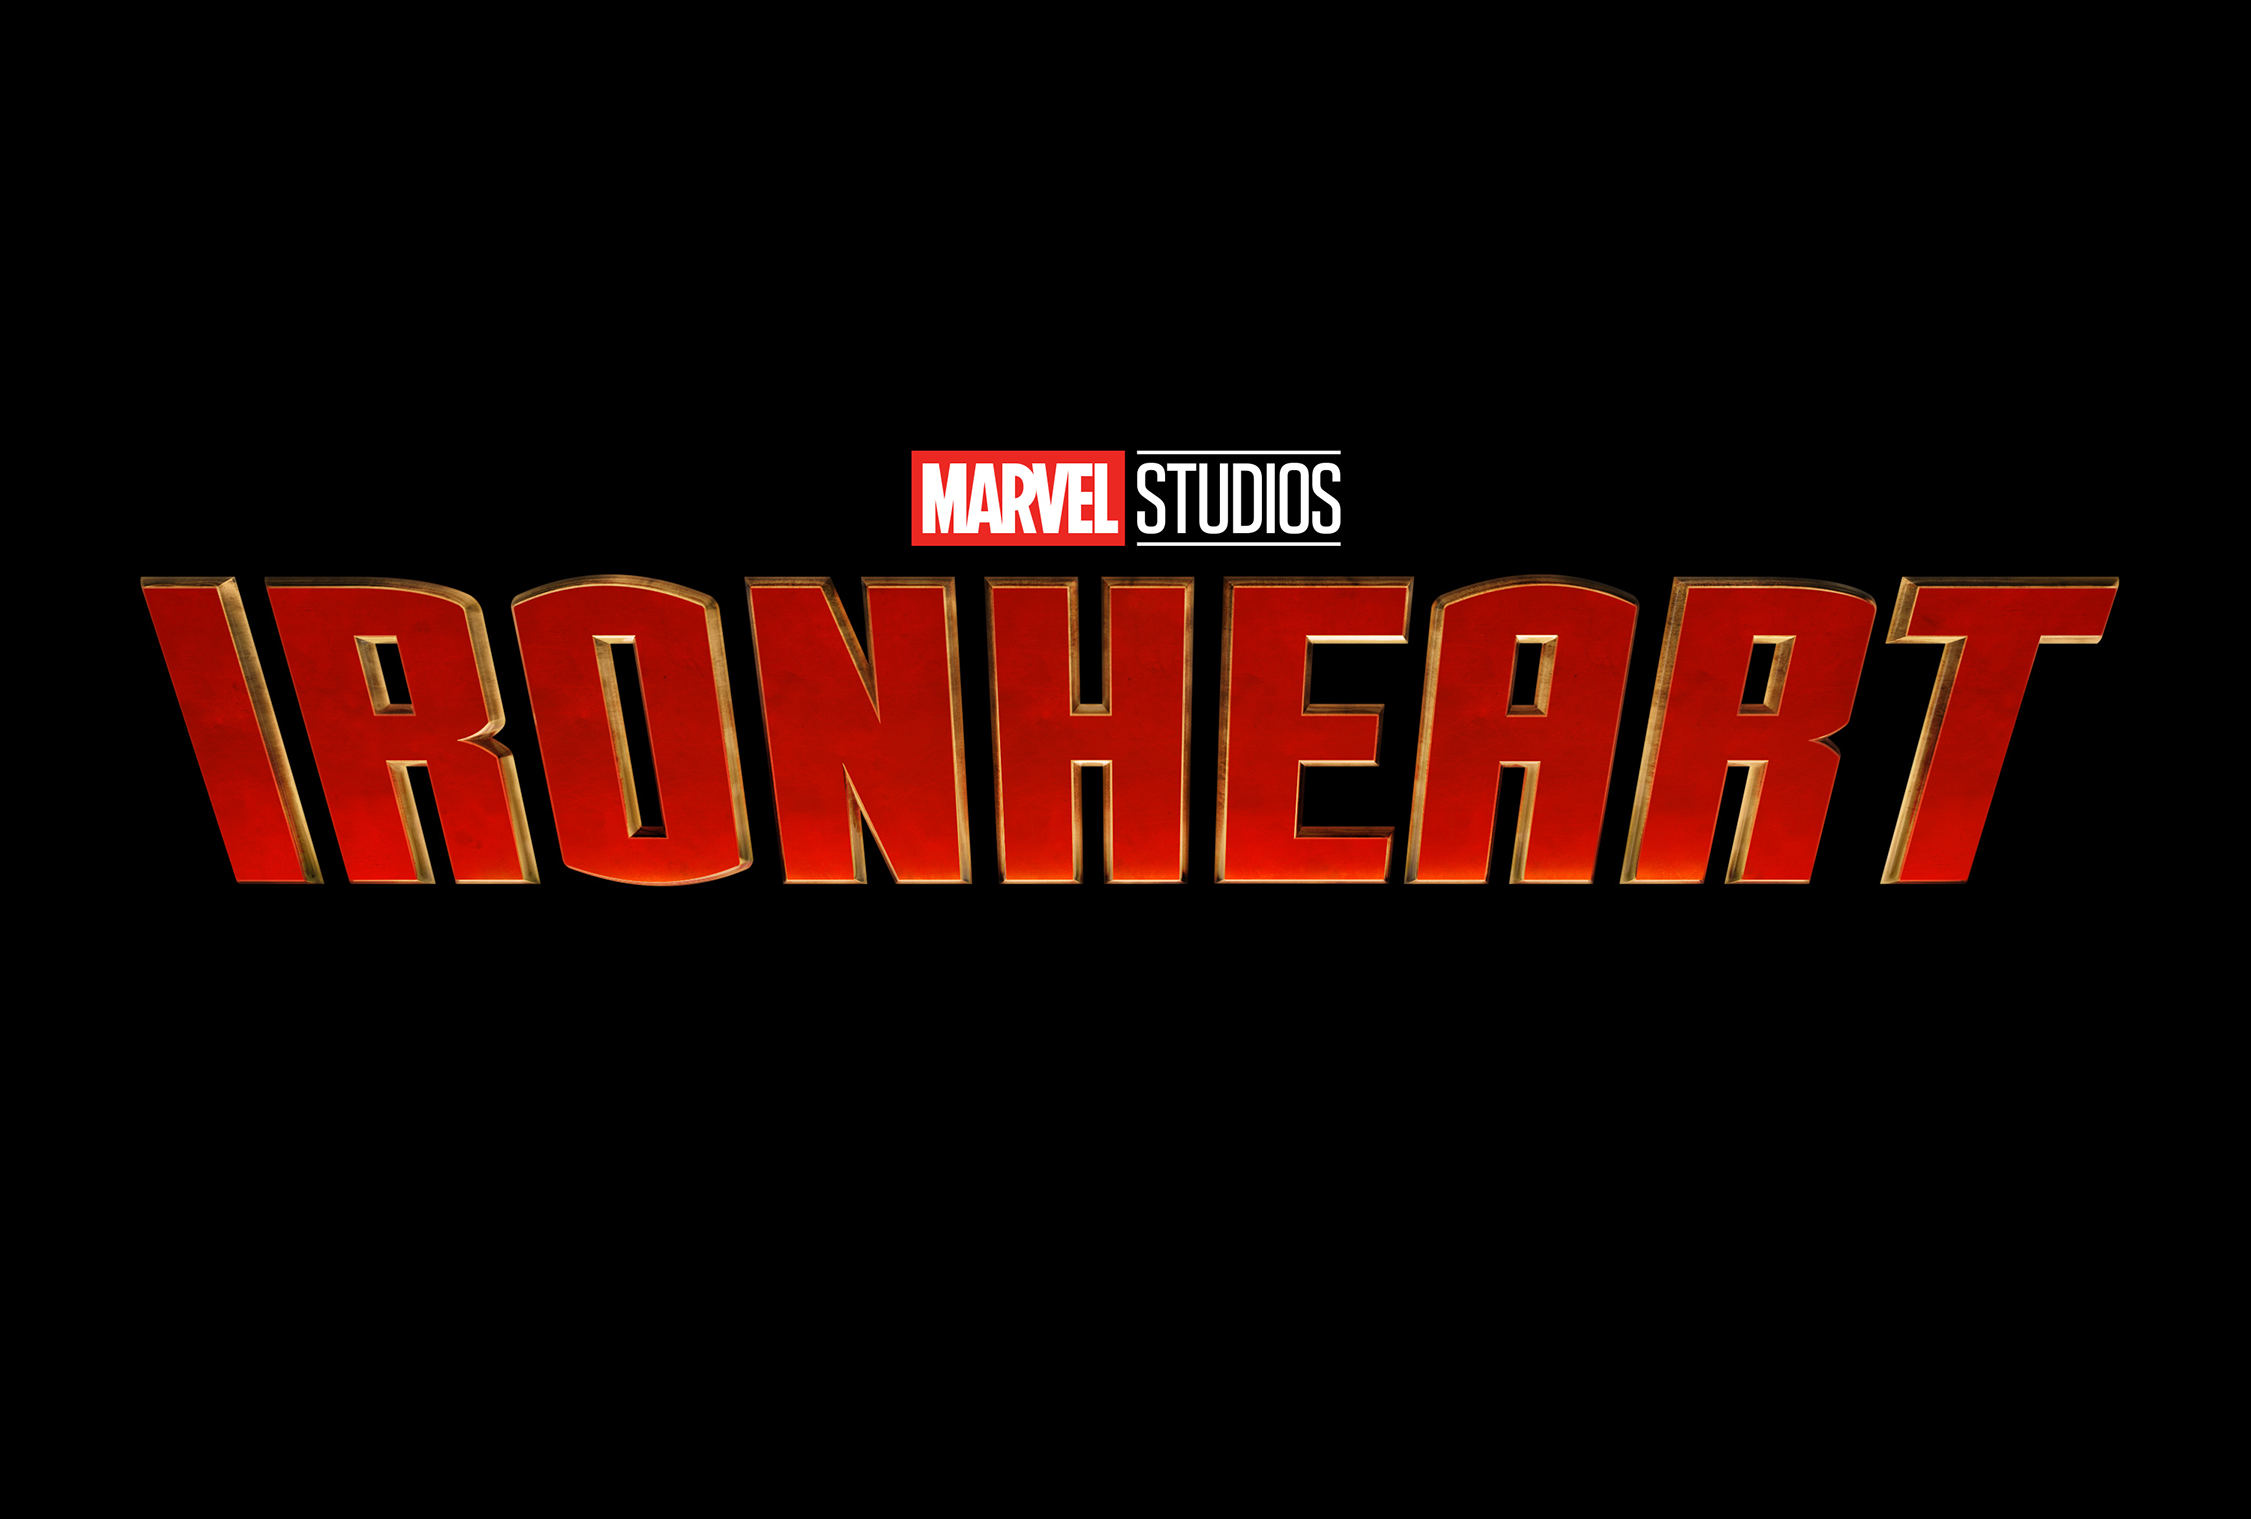 Alden Ehrenreich was coy on his Ironheart character